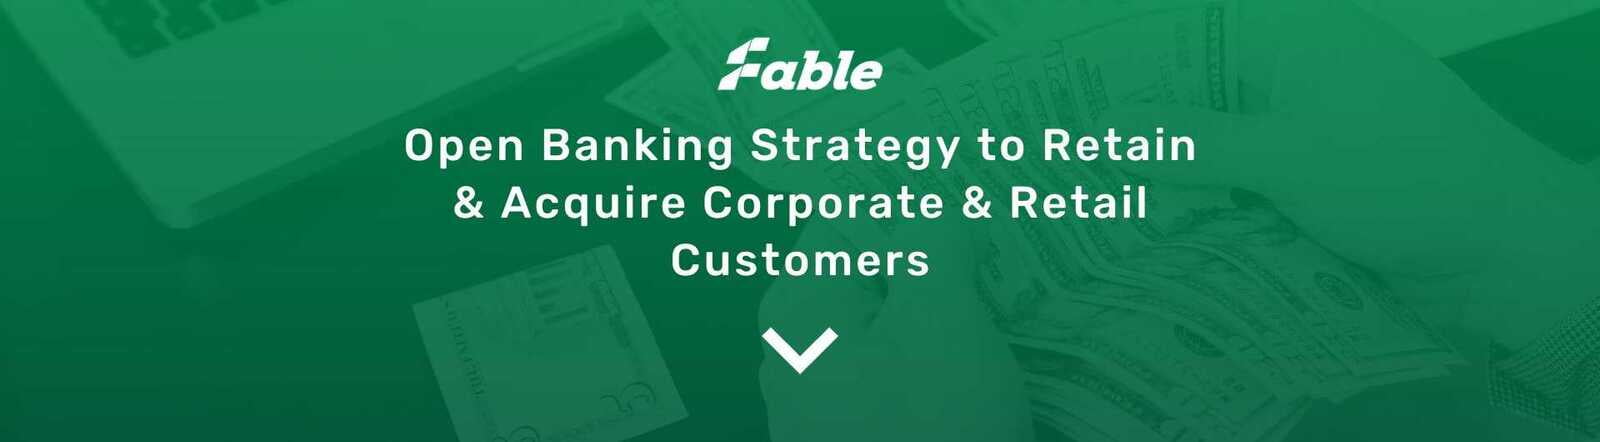 Open Banking Strategy to Retain & Acquire Corporate & Retail Customers